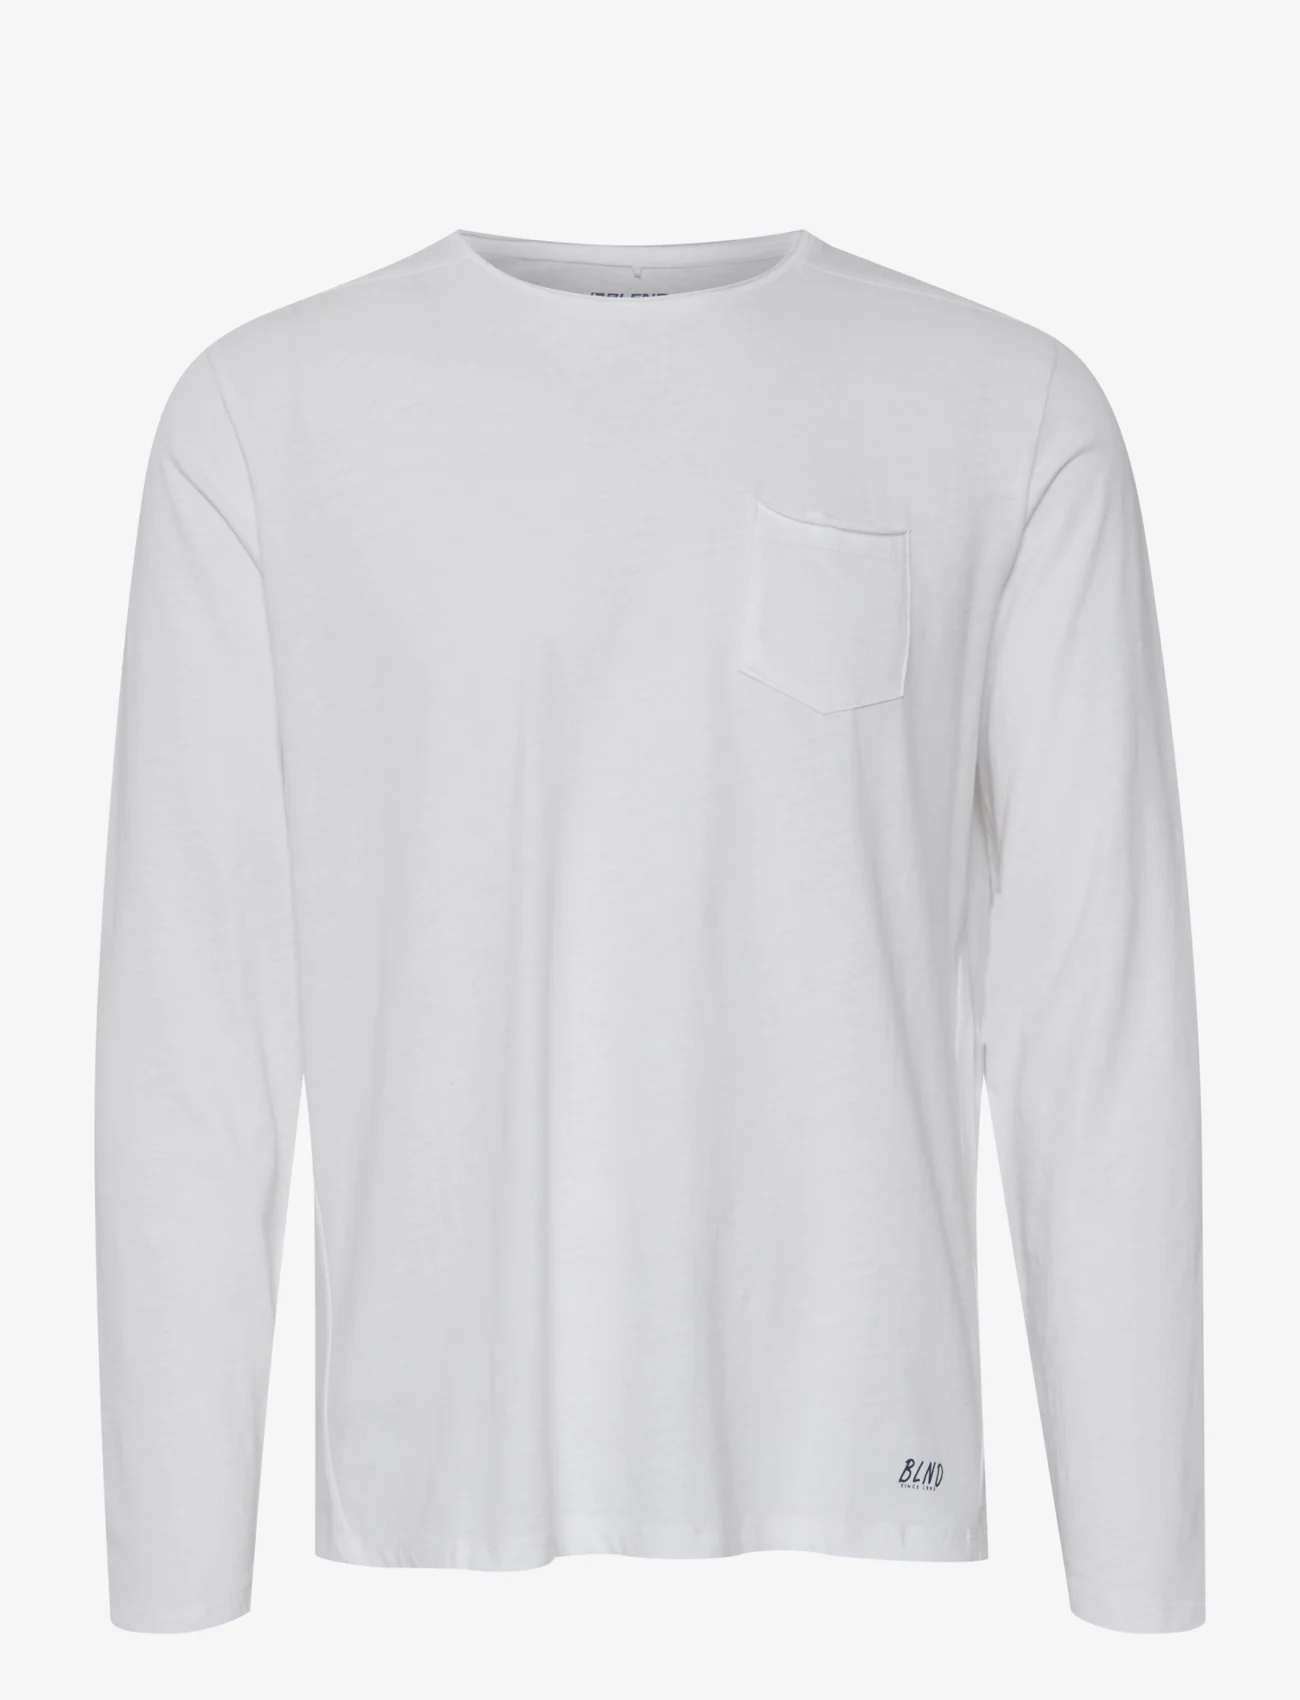 Blend - BHNICOLAI tee l.s. - long-sleeved t-shirts - white - 1